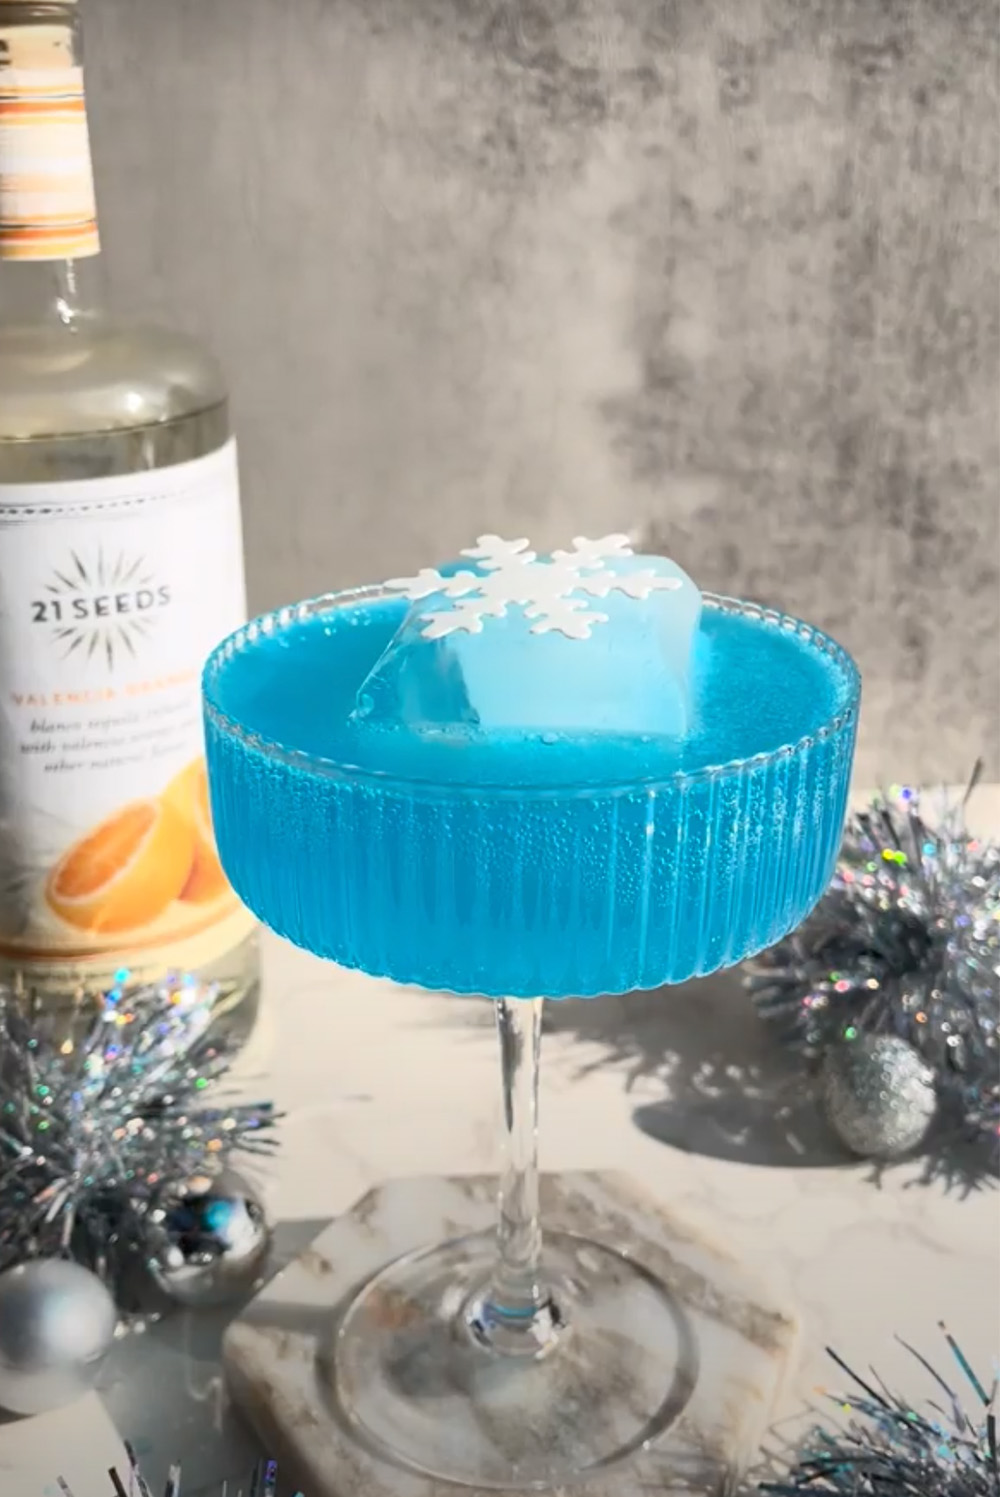 A Frostbite Seed + Soda cocktail adorned with delicate snowflakes on its surface.